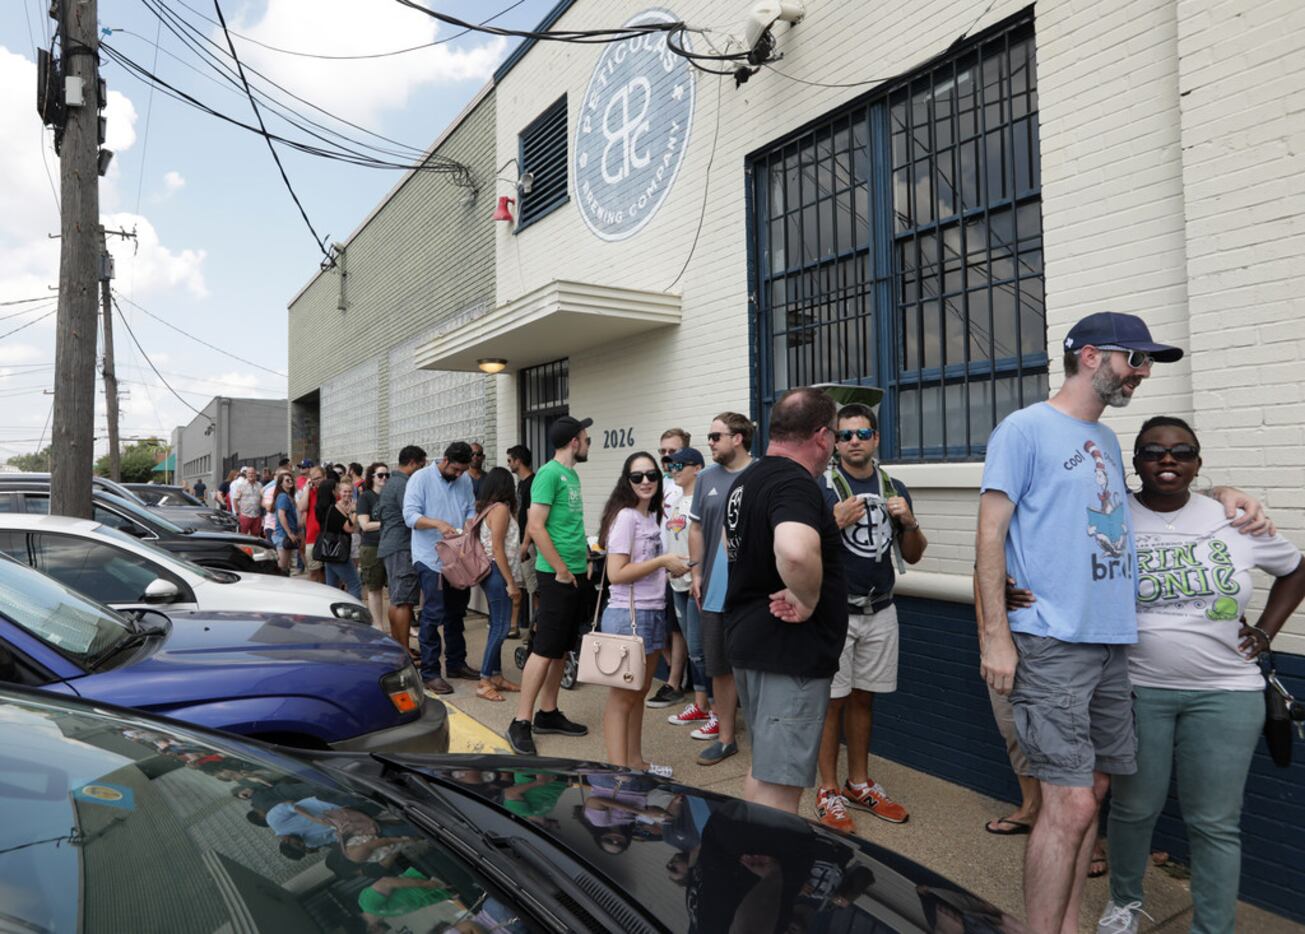 Customers wait in line to celebrate the new "beer to go" state law at Peticolas Brewing...